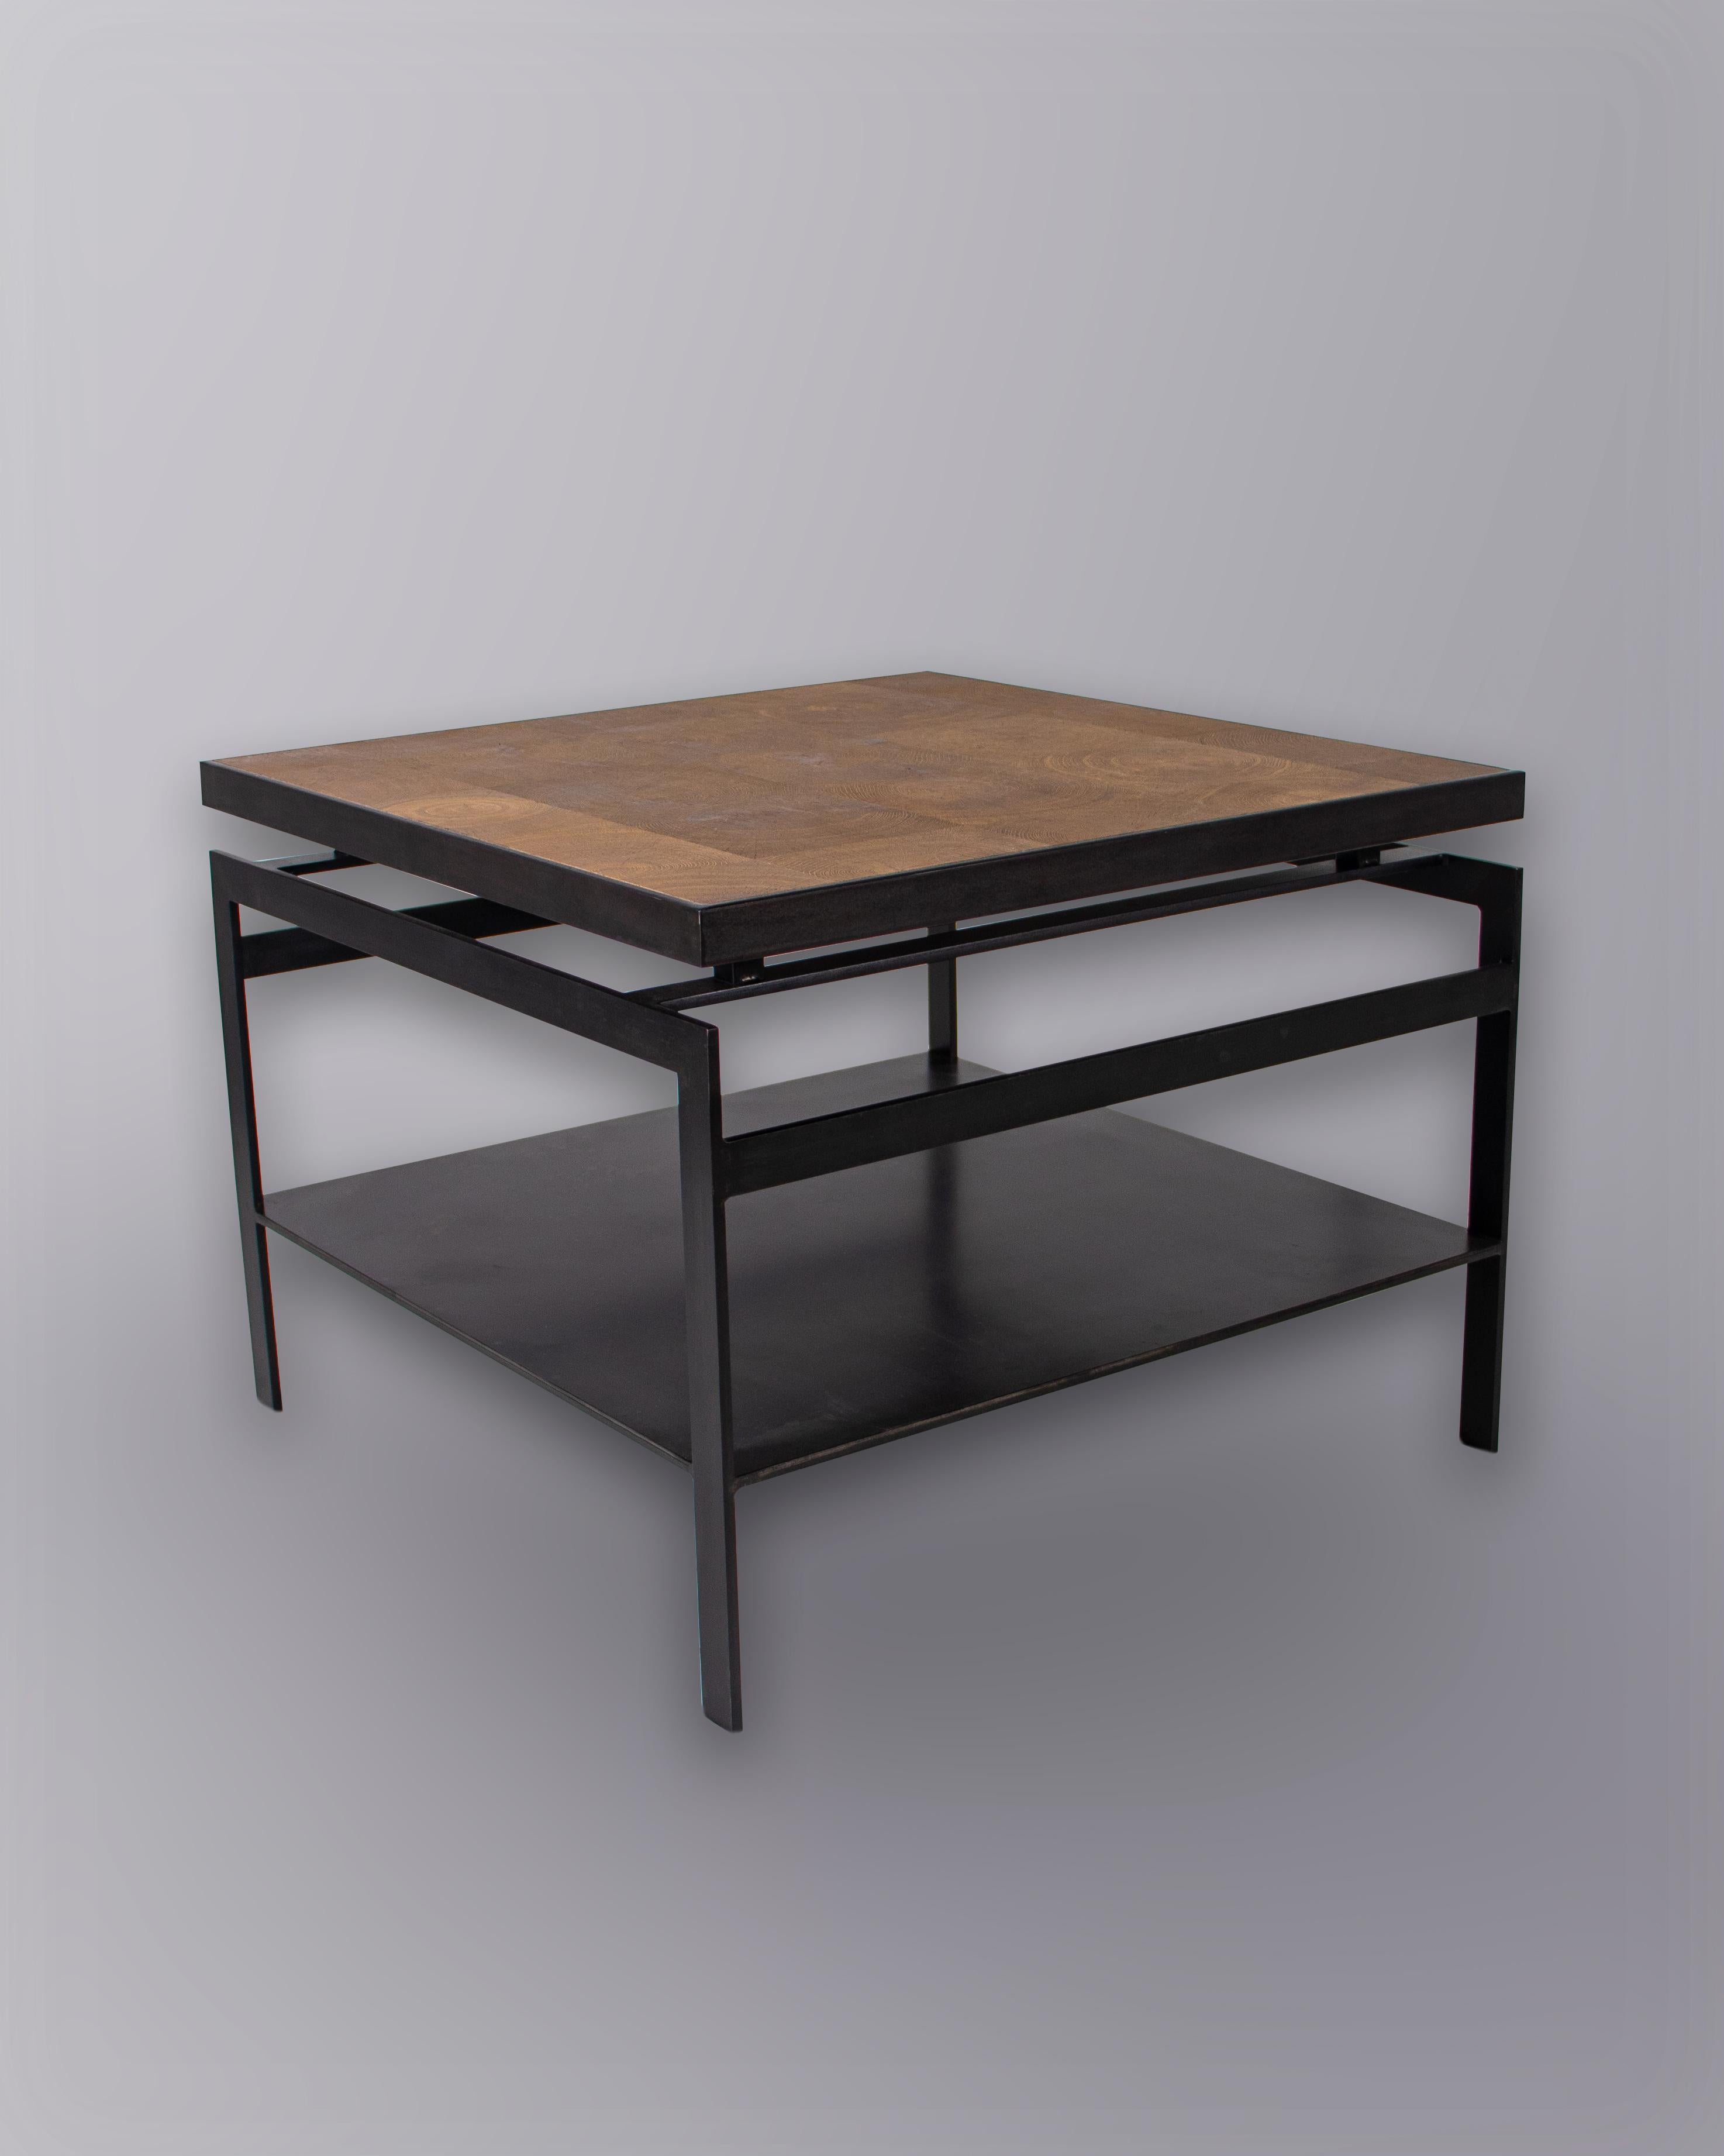 Minimalist end table made from solid black steel with natural oak top.